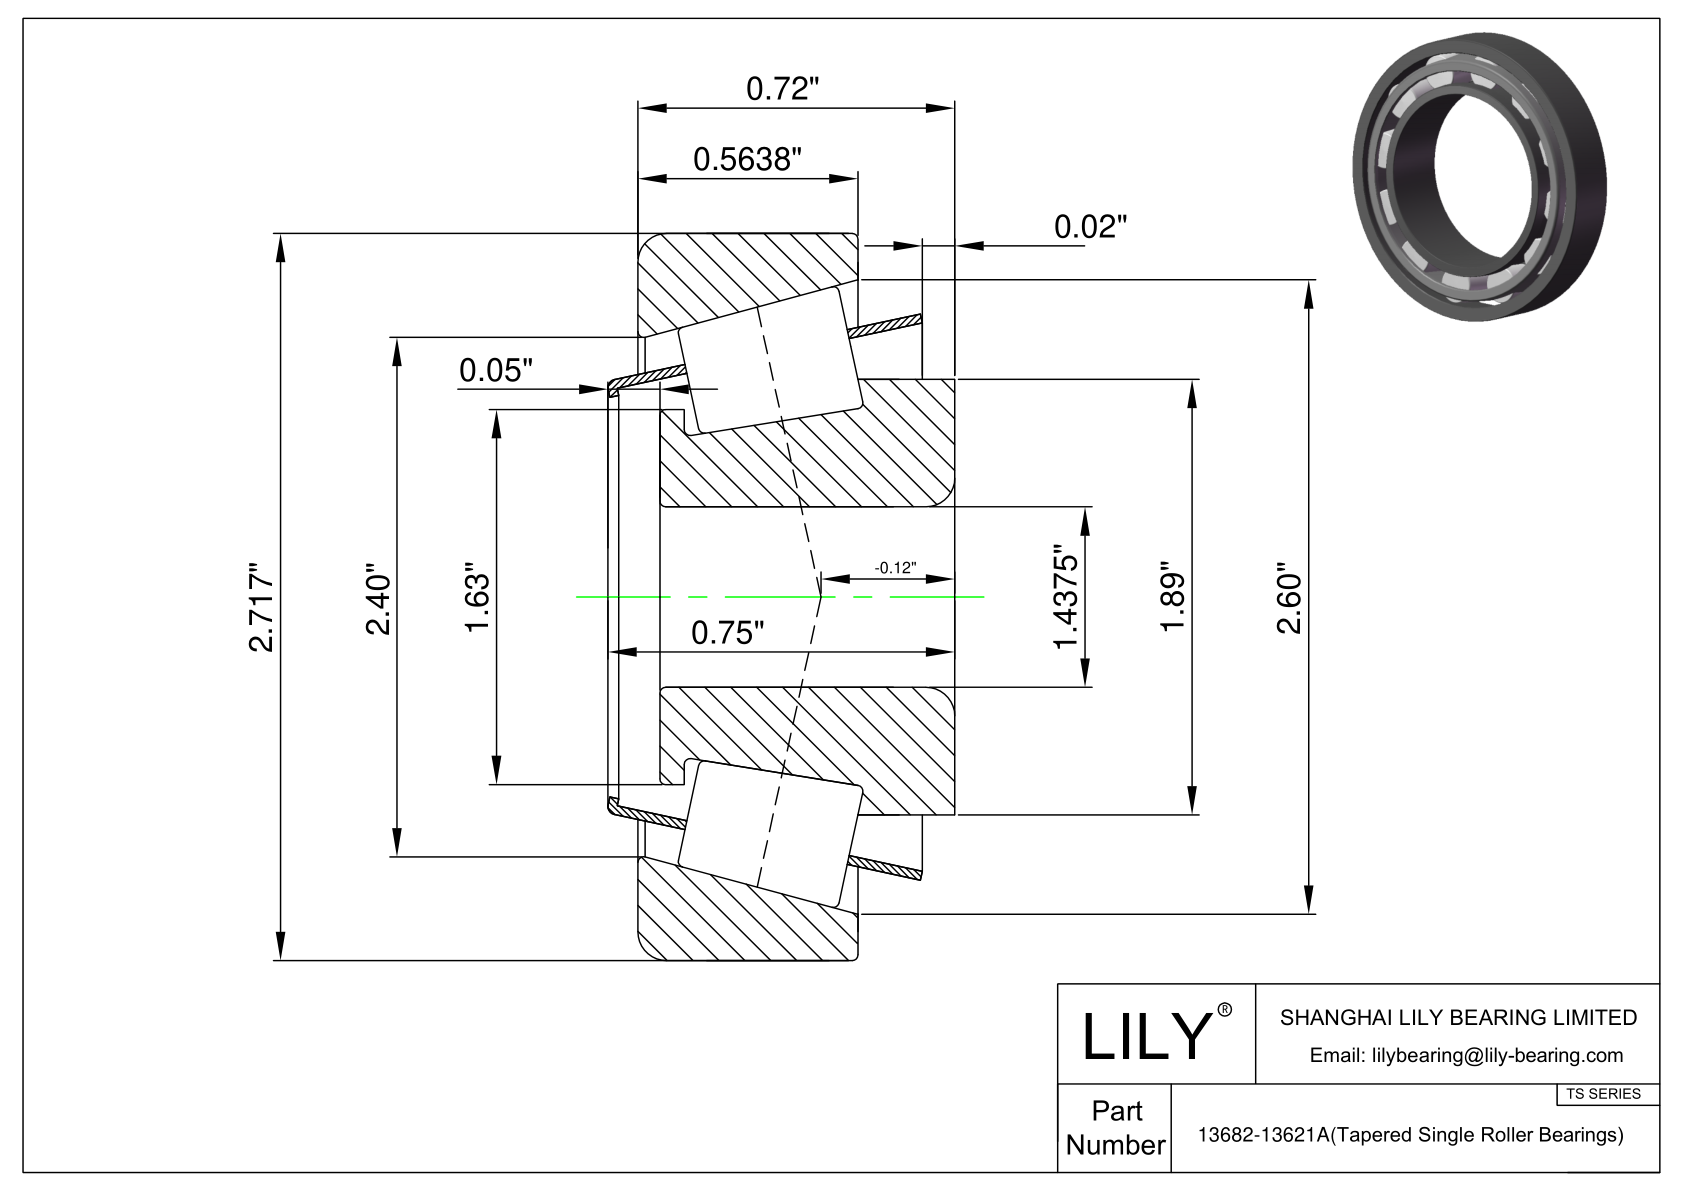 13682-13621A TS (Tapered Single Roller Bearings) (Imperial) cad drawing